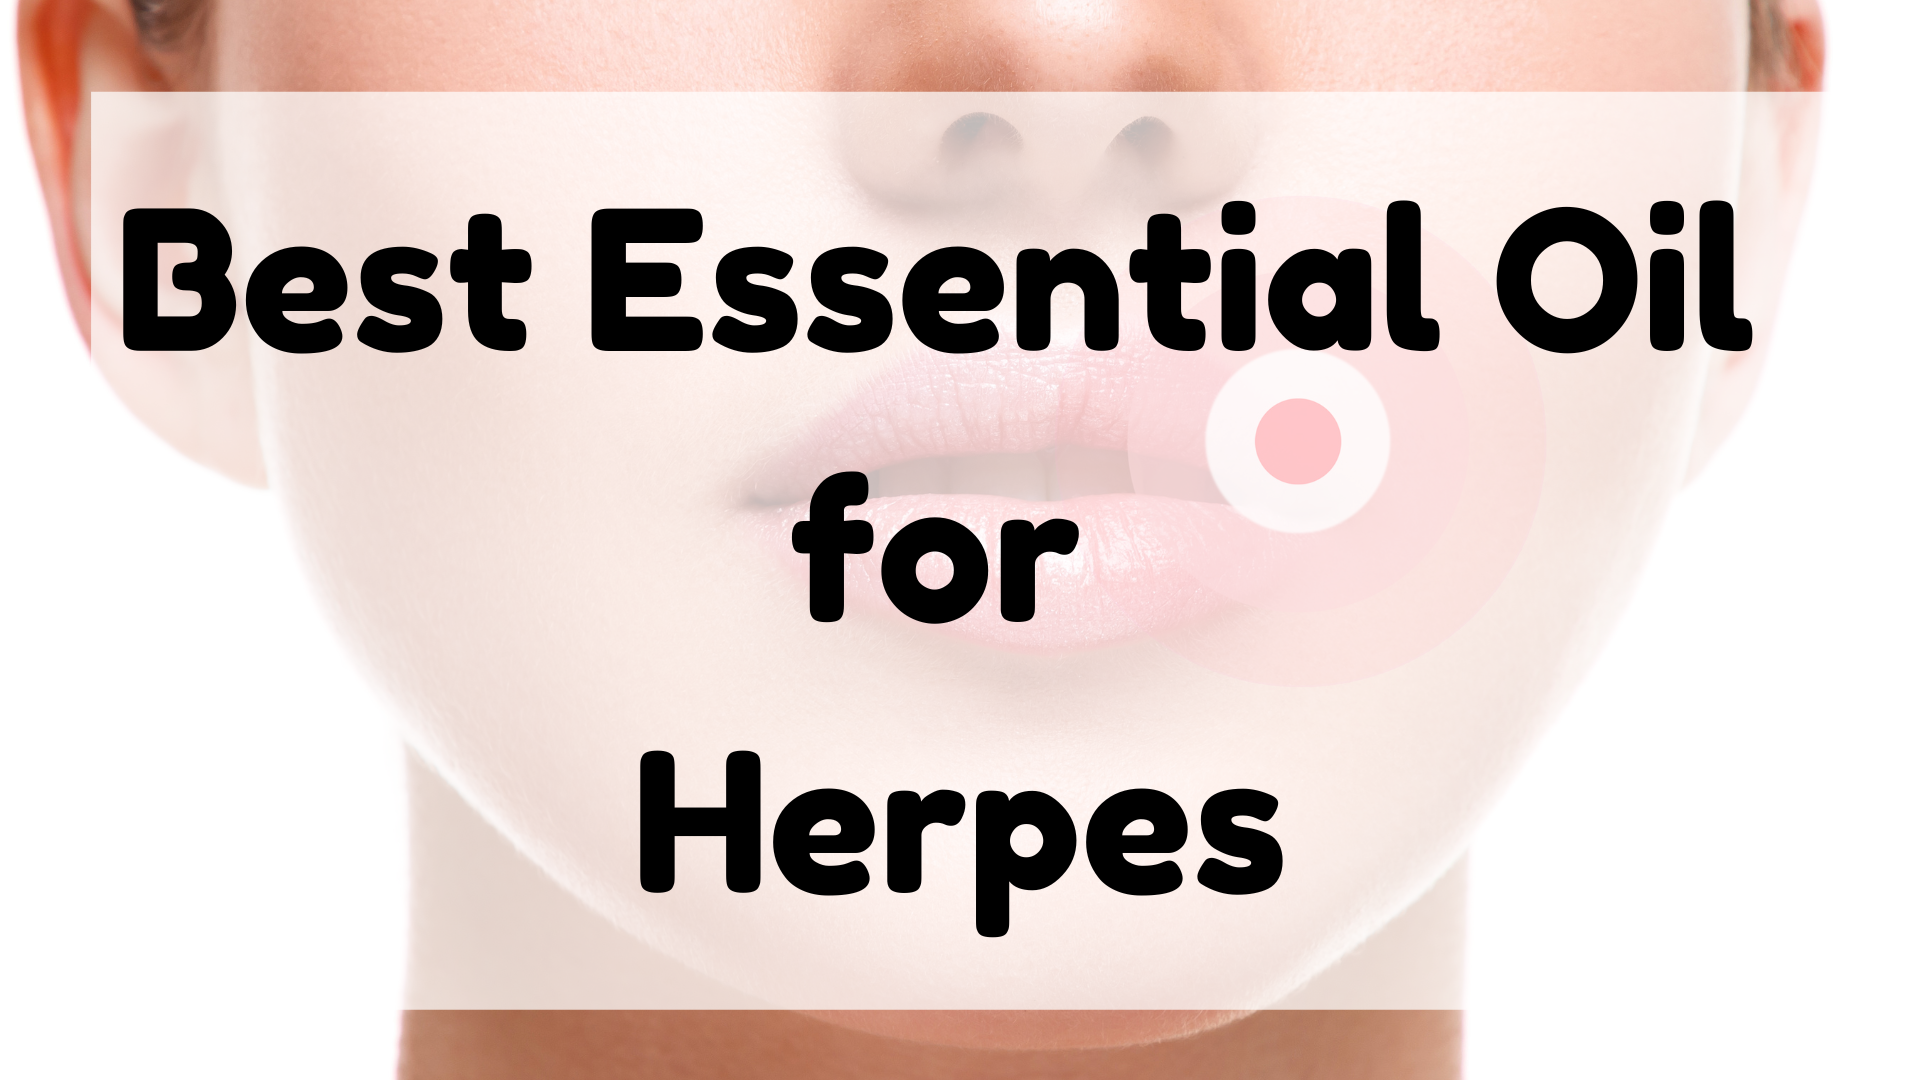 Best Essential Oil for herpes featured image